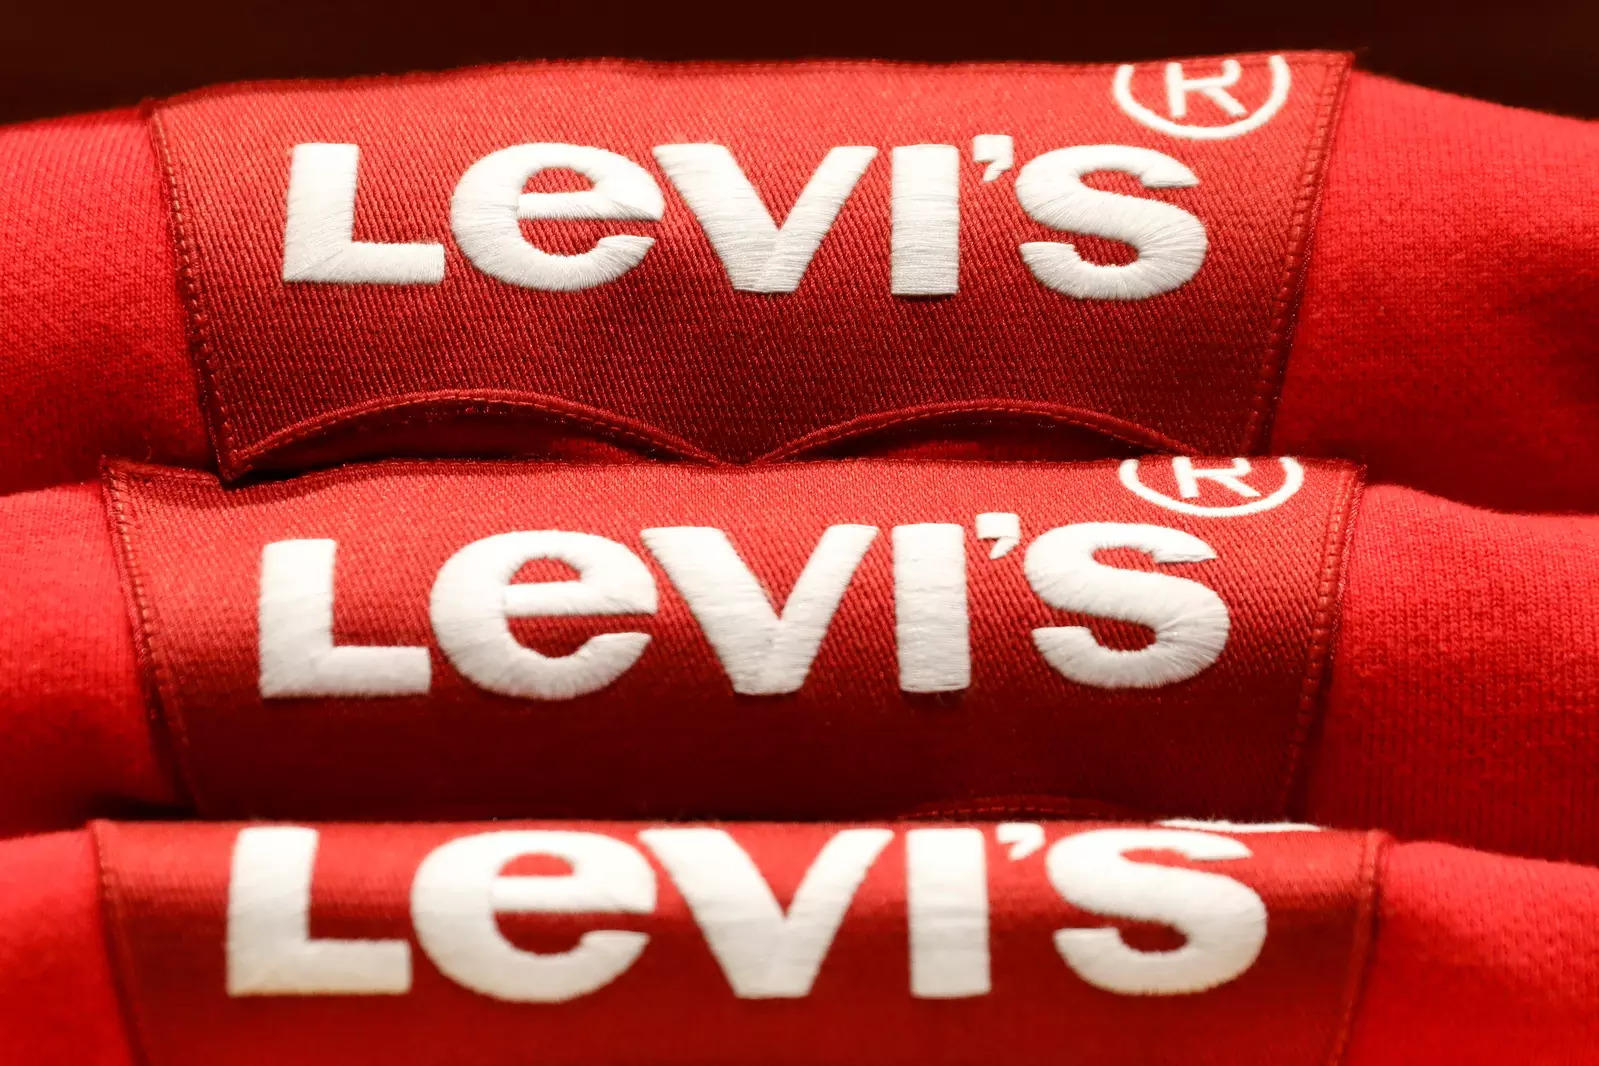 Levi Strauss raises sales growth outlook on vaccine rollout hopes, Retail News, ET Retail